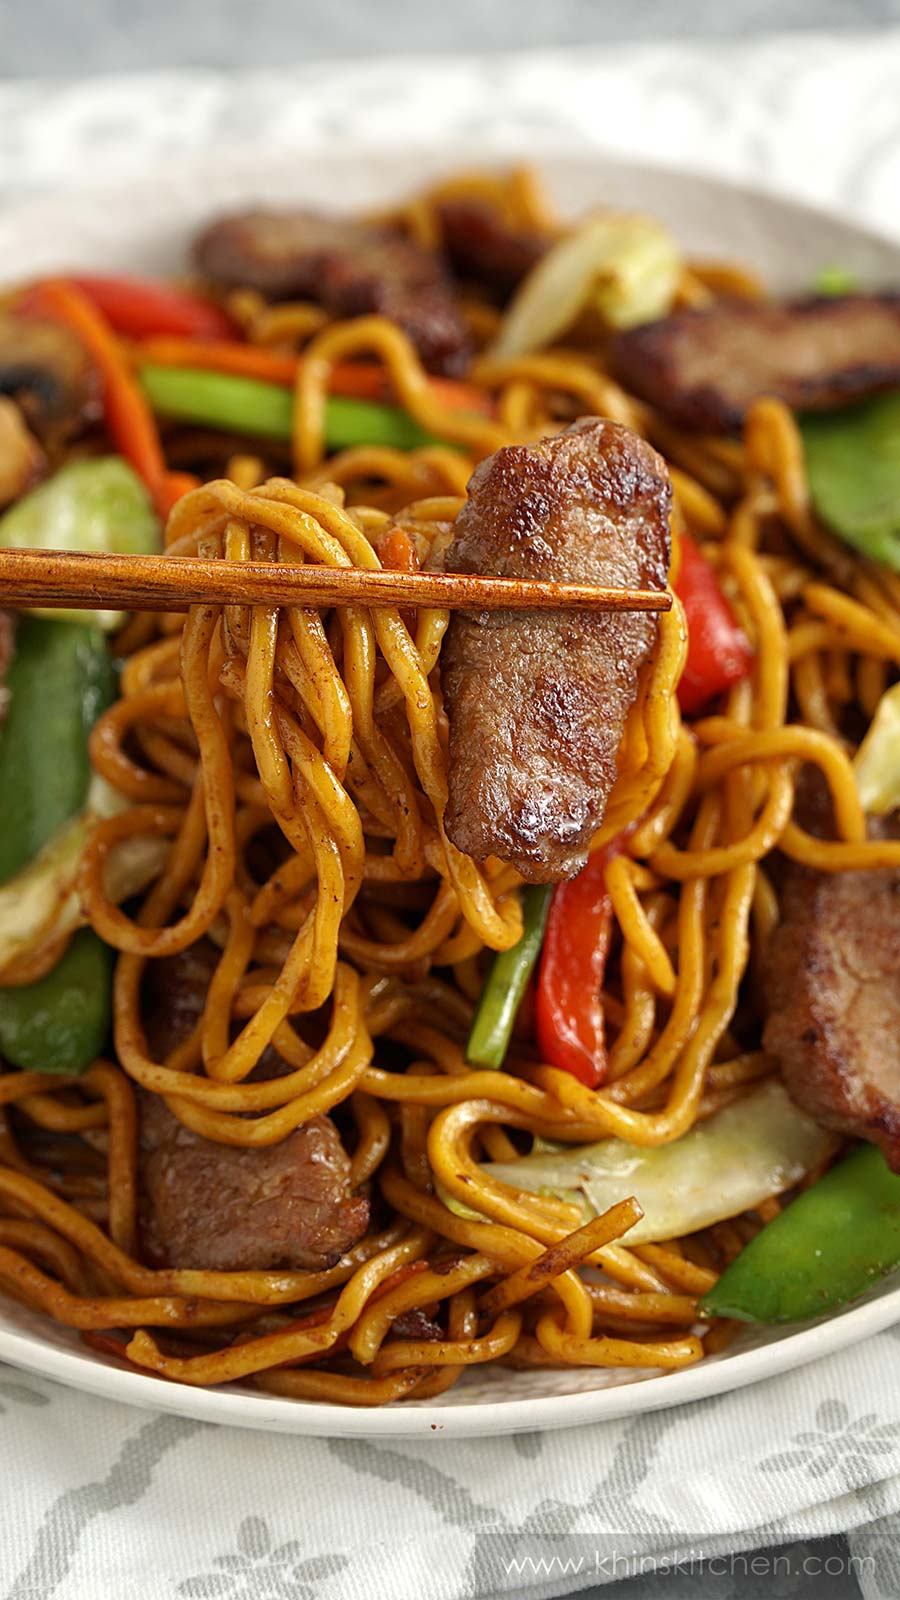 beef lo mein